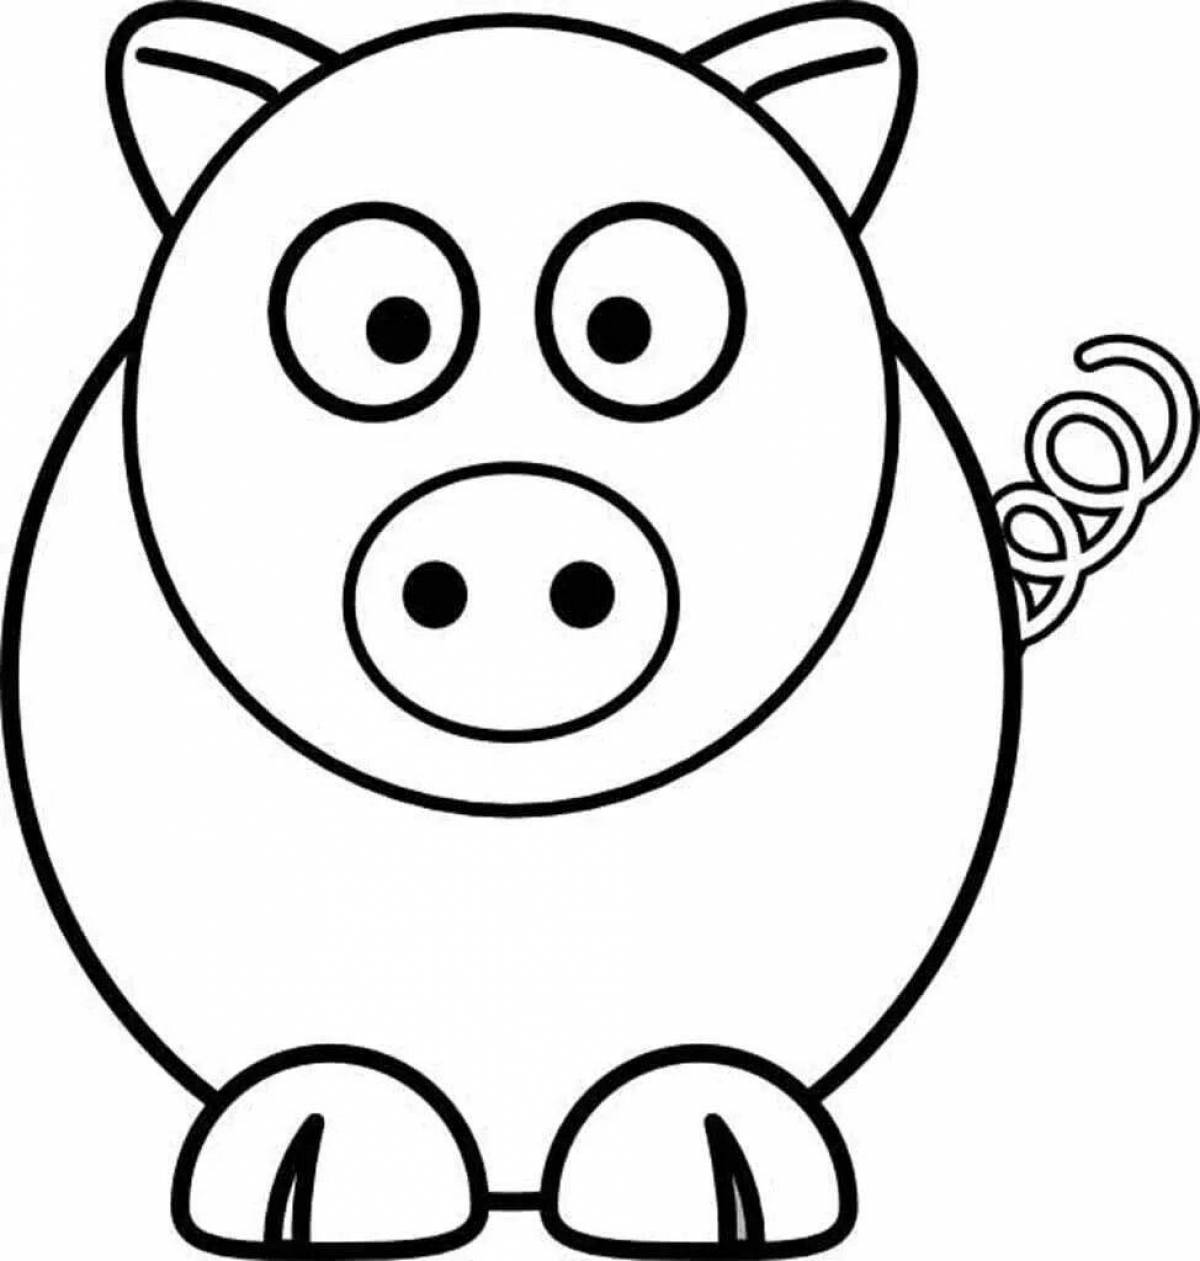 Coloring pig for kids